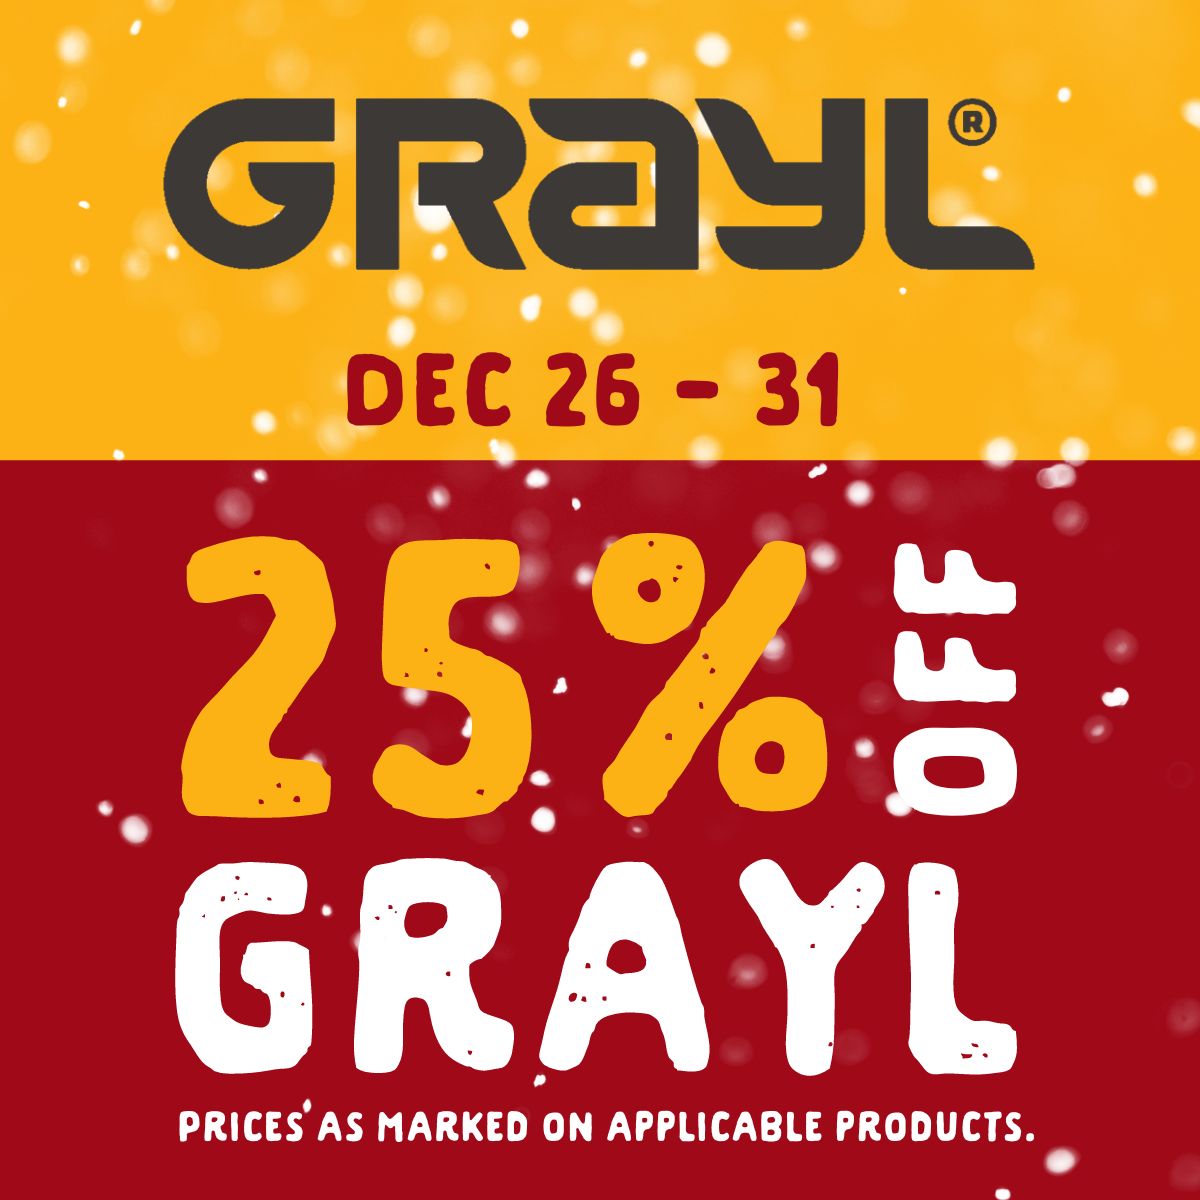 25% off Grayl from December 26 to 31. Prices as marked on applicable products.